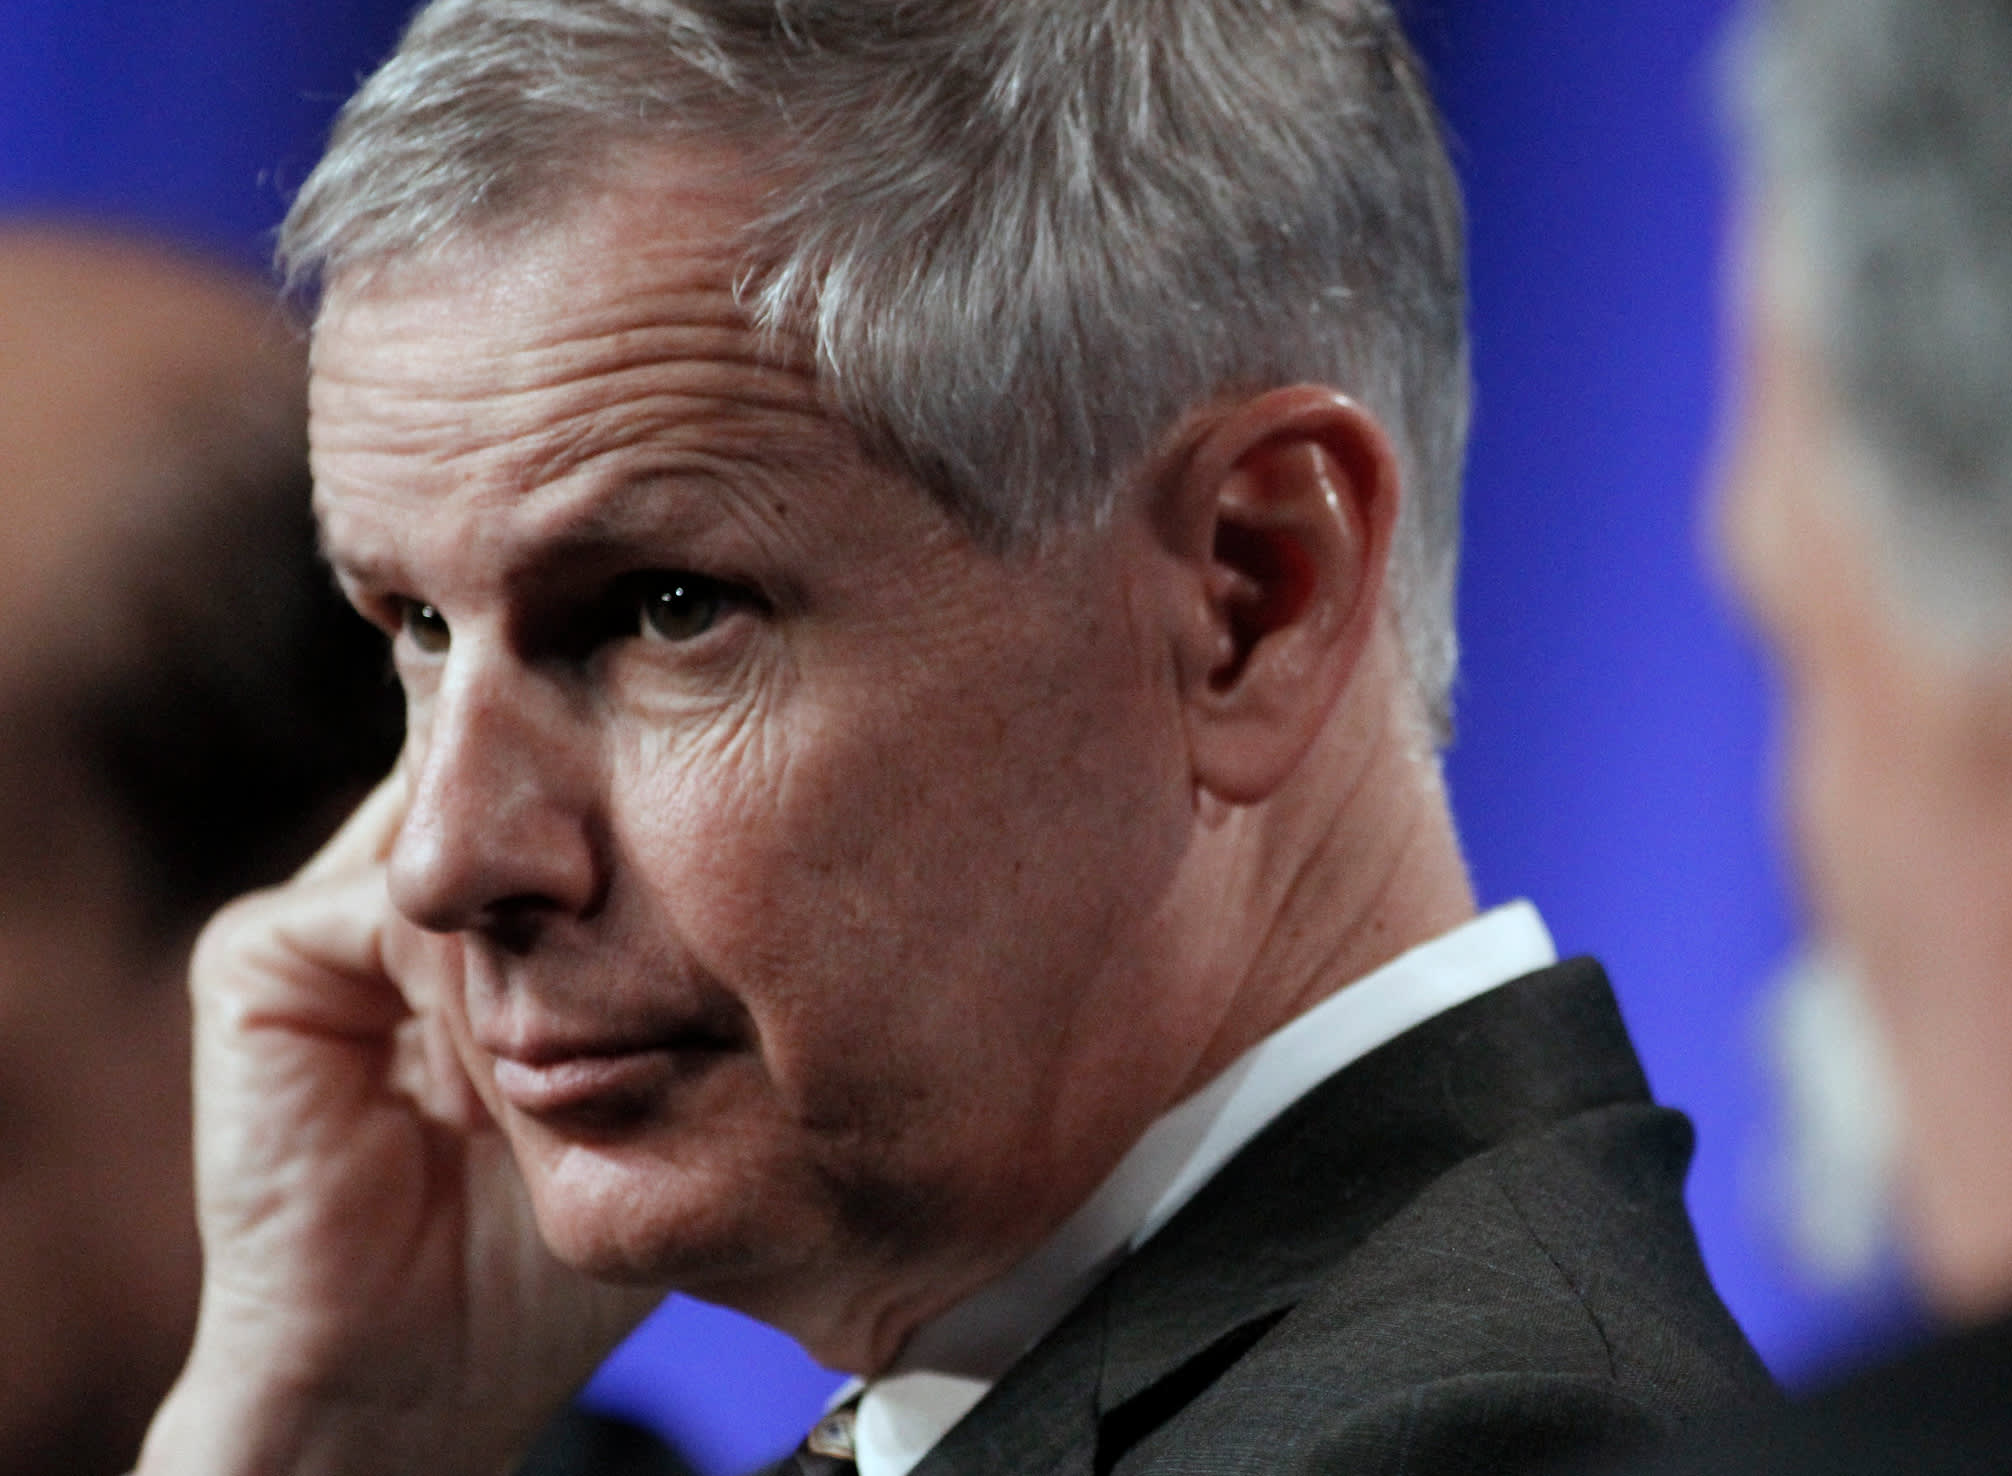 Billionaire Charlie Ergen merging Dish and EchoStar to expand mobile and satellite telecom empire